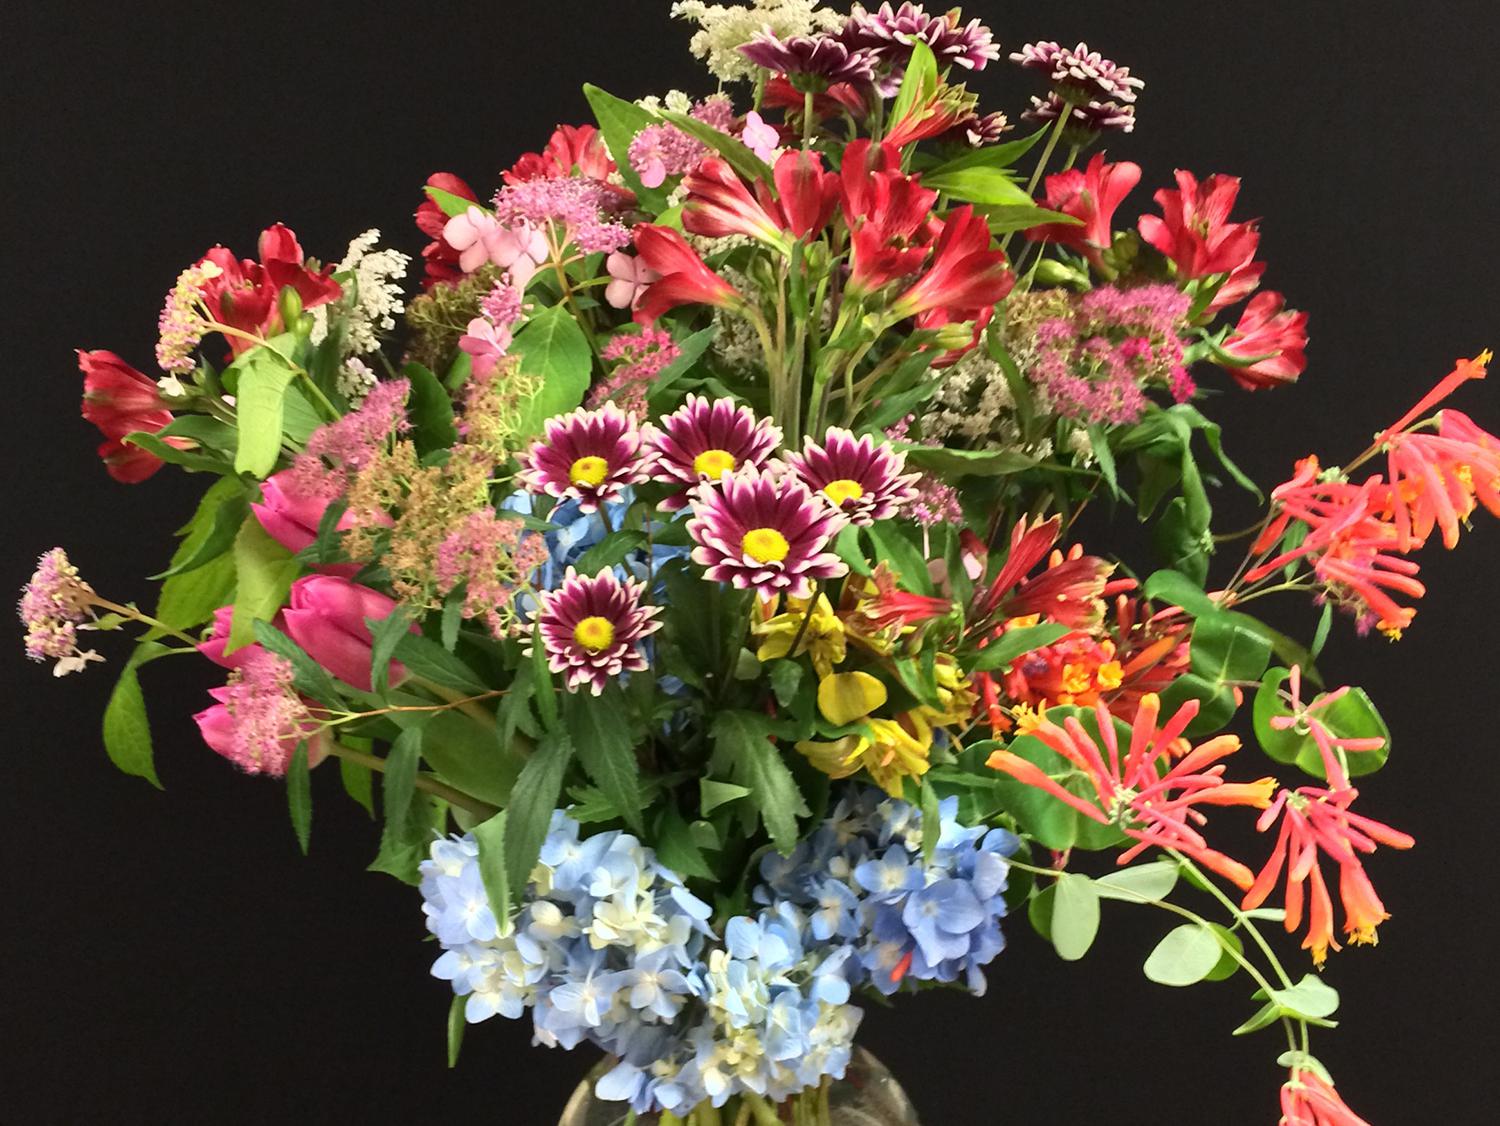 An upcoming demonstration will reveal ways to use Mississippi foliage in creative designs, such as this mixed floral arrangement. (Submitted photo)